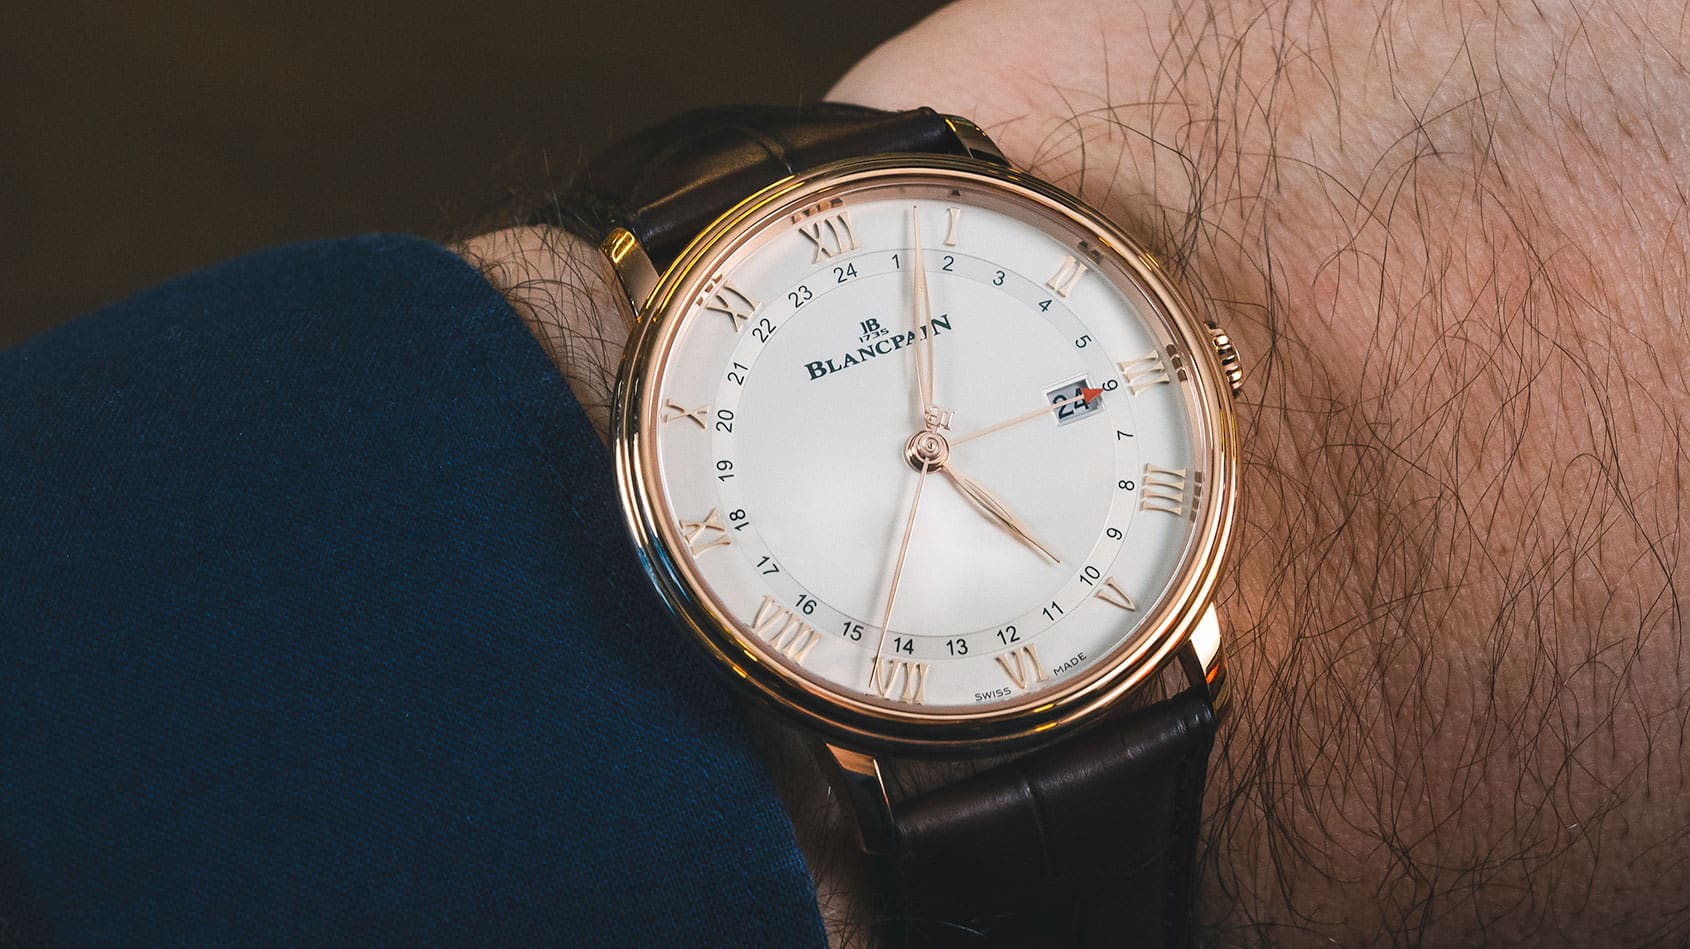 VIDEO: Blancpain’s Villeret GMT Date ensures elegance, no matter the time zone 